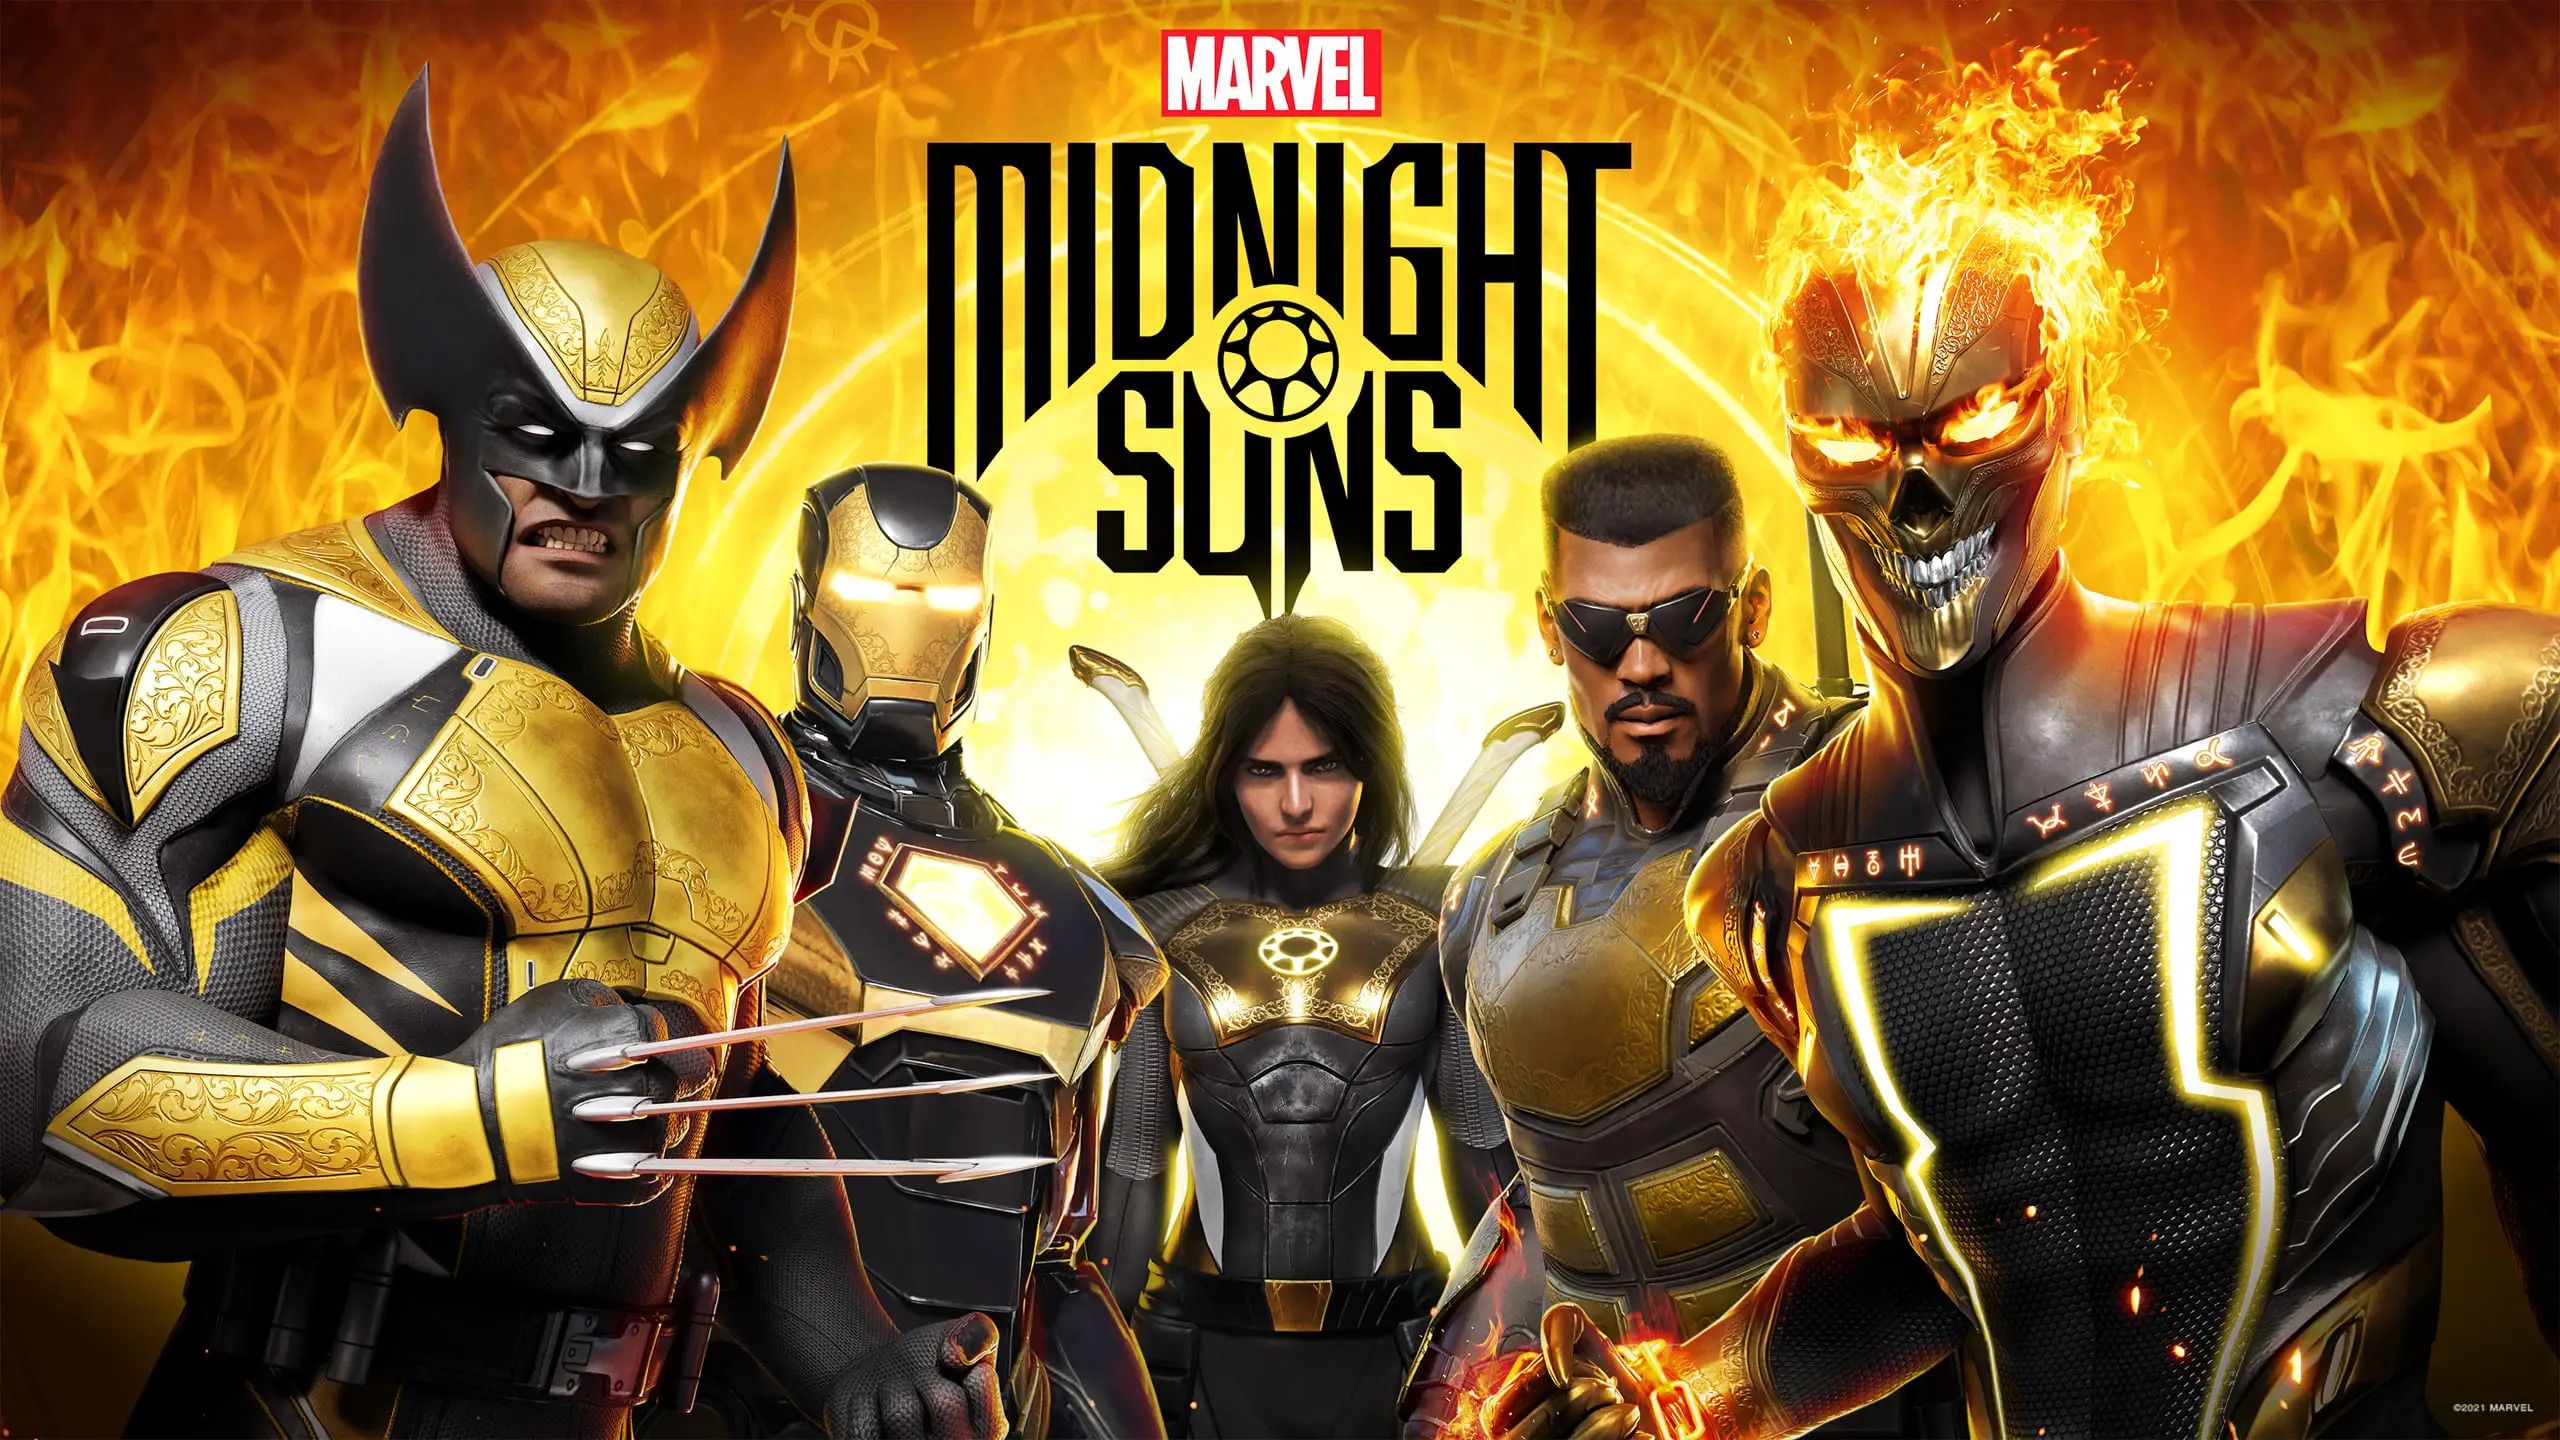 Marvel's Midnight Suns Release Date